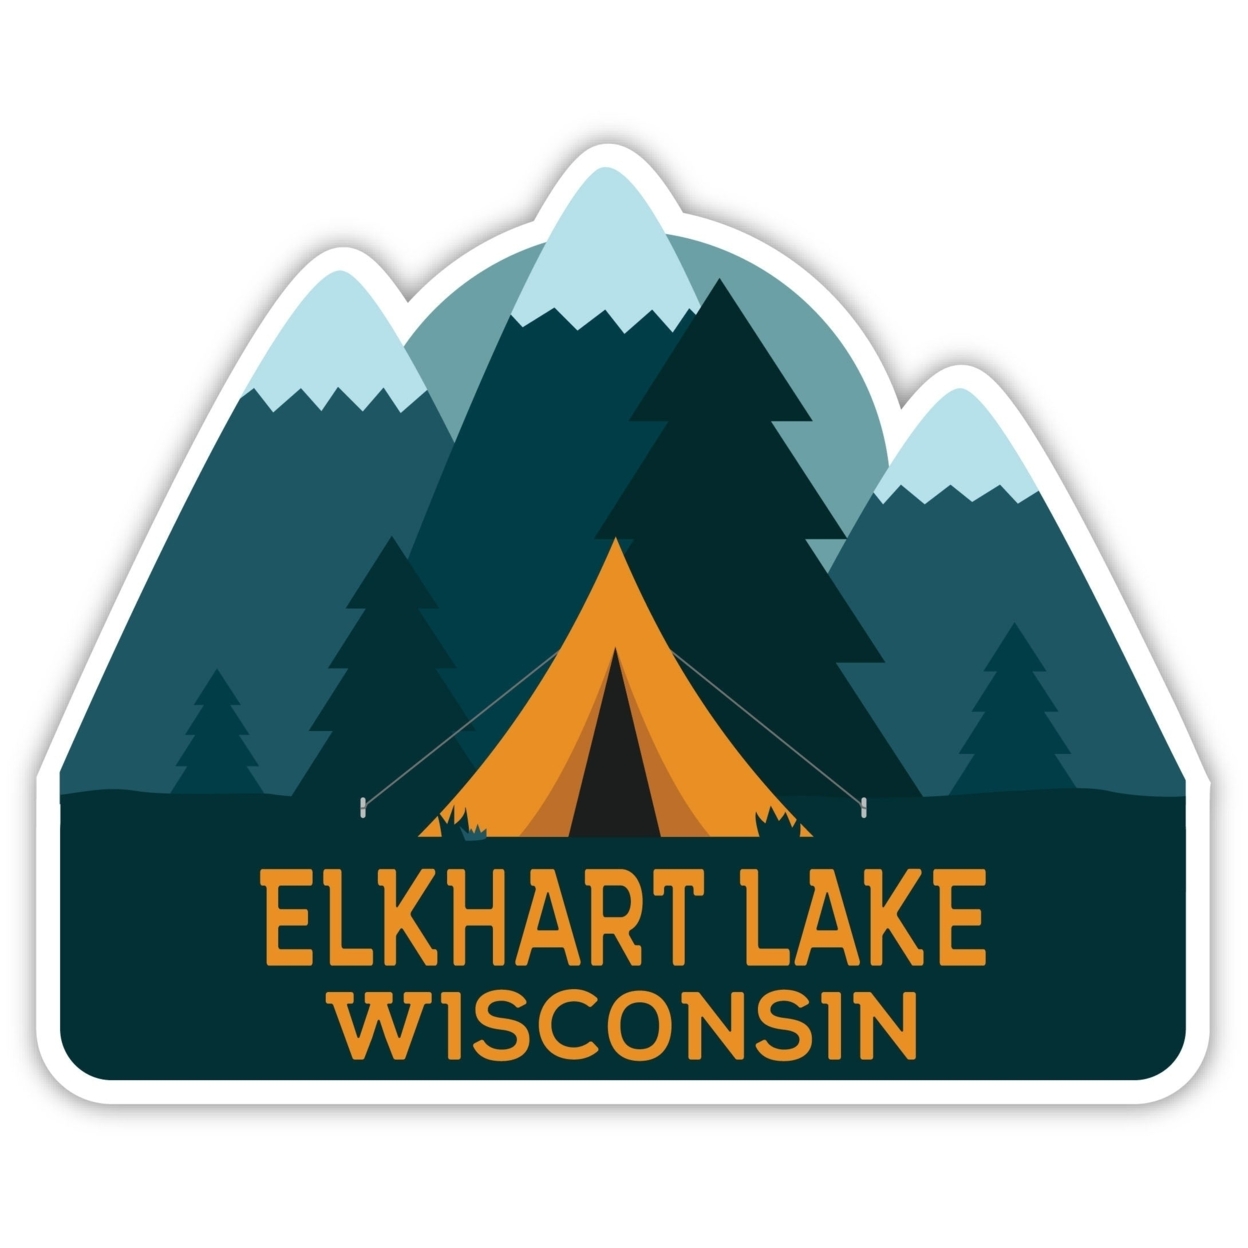 Elkhart Lake Wisconsin Souvenir Decorative Stickers (Choose Theme And Size) - 4-Pack, 6-Inch, Tent